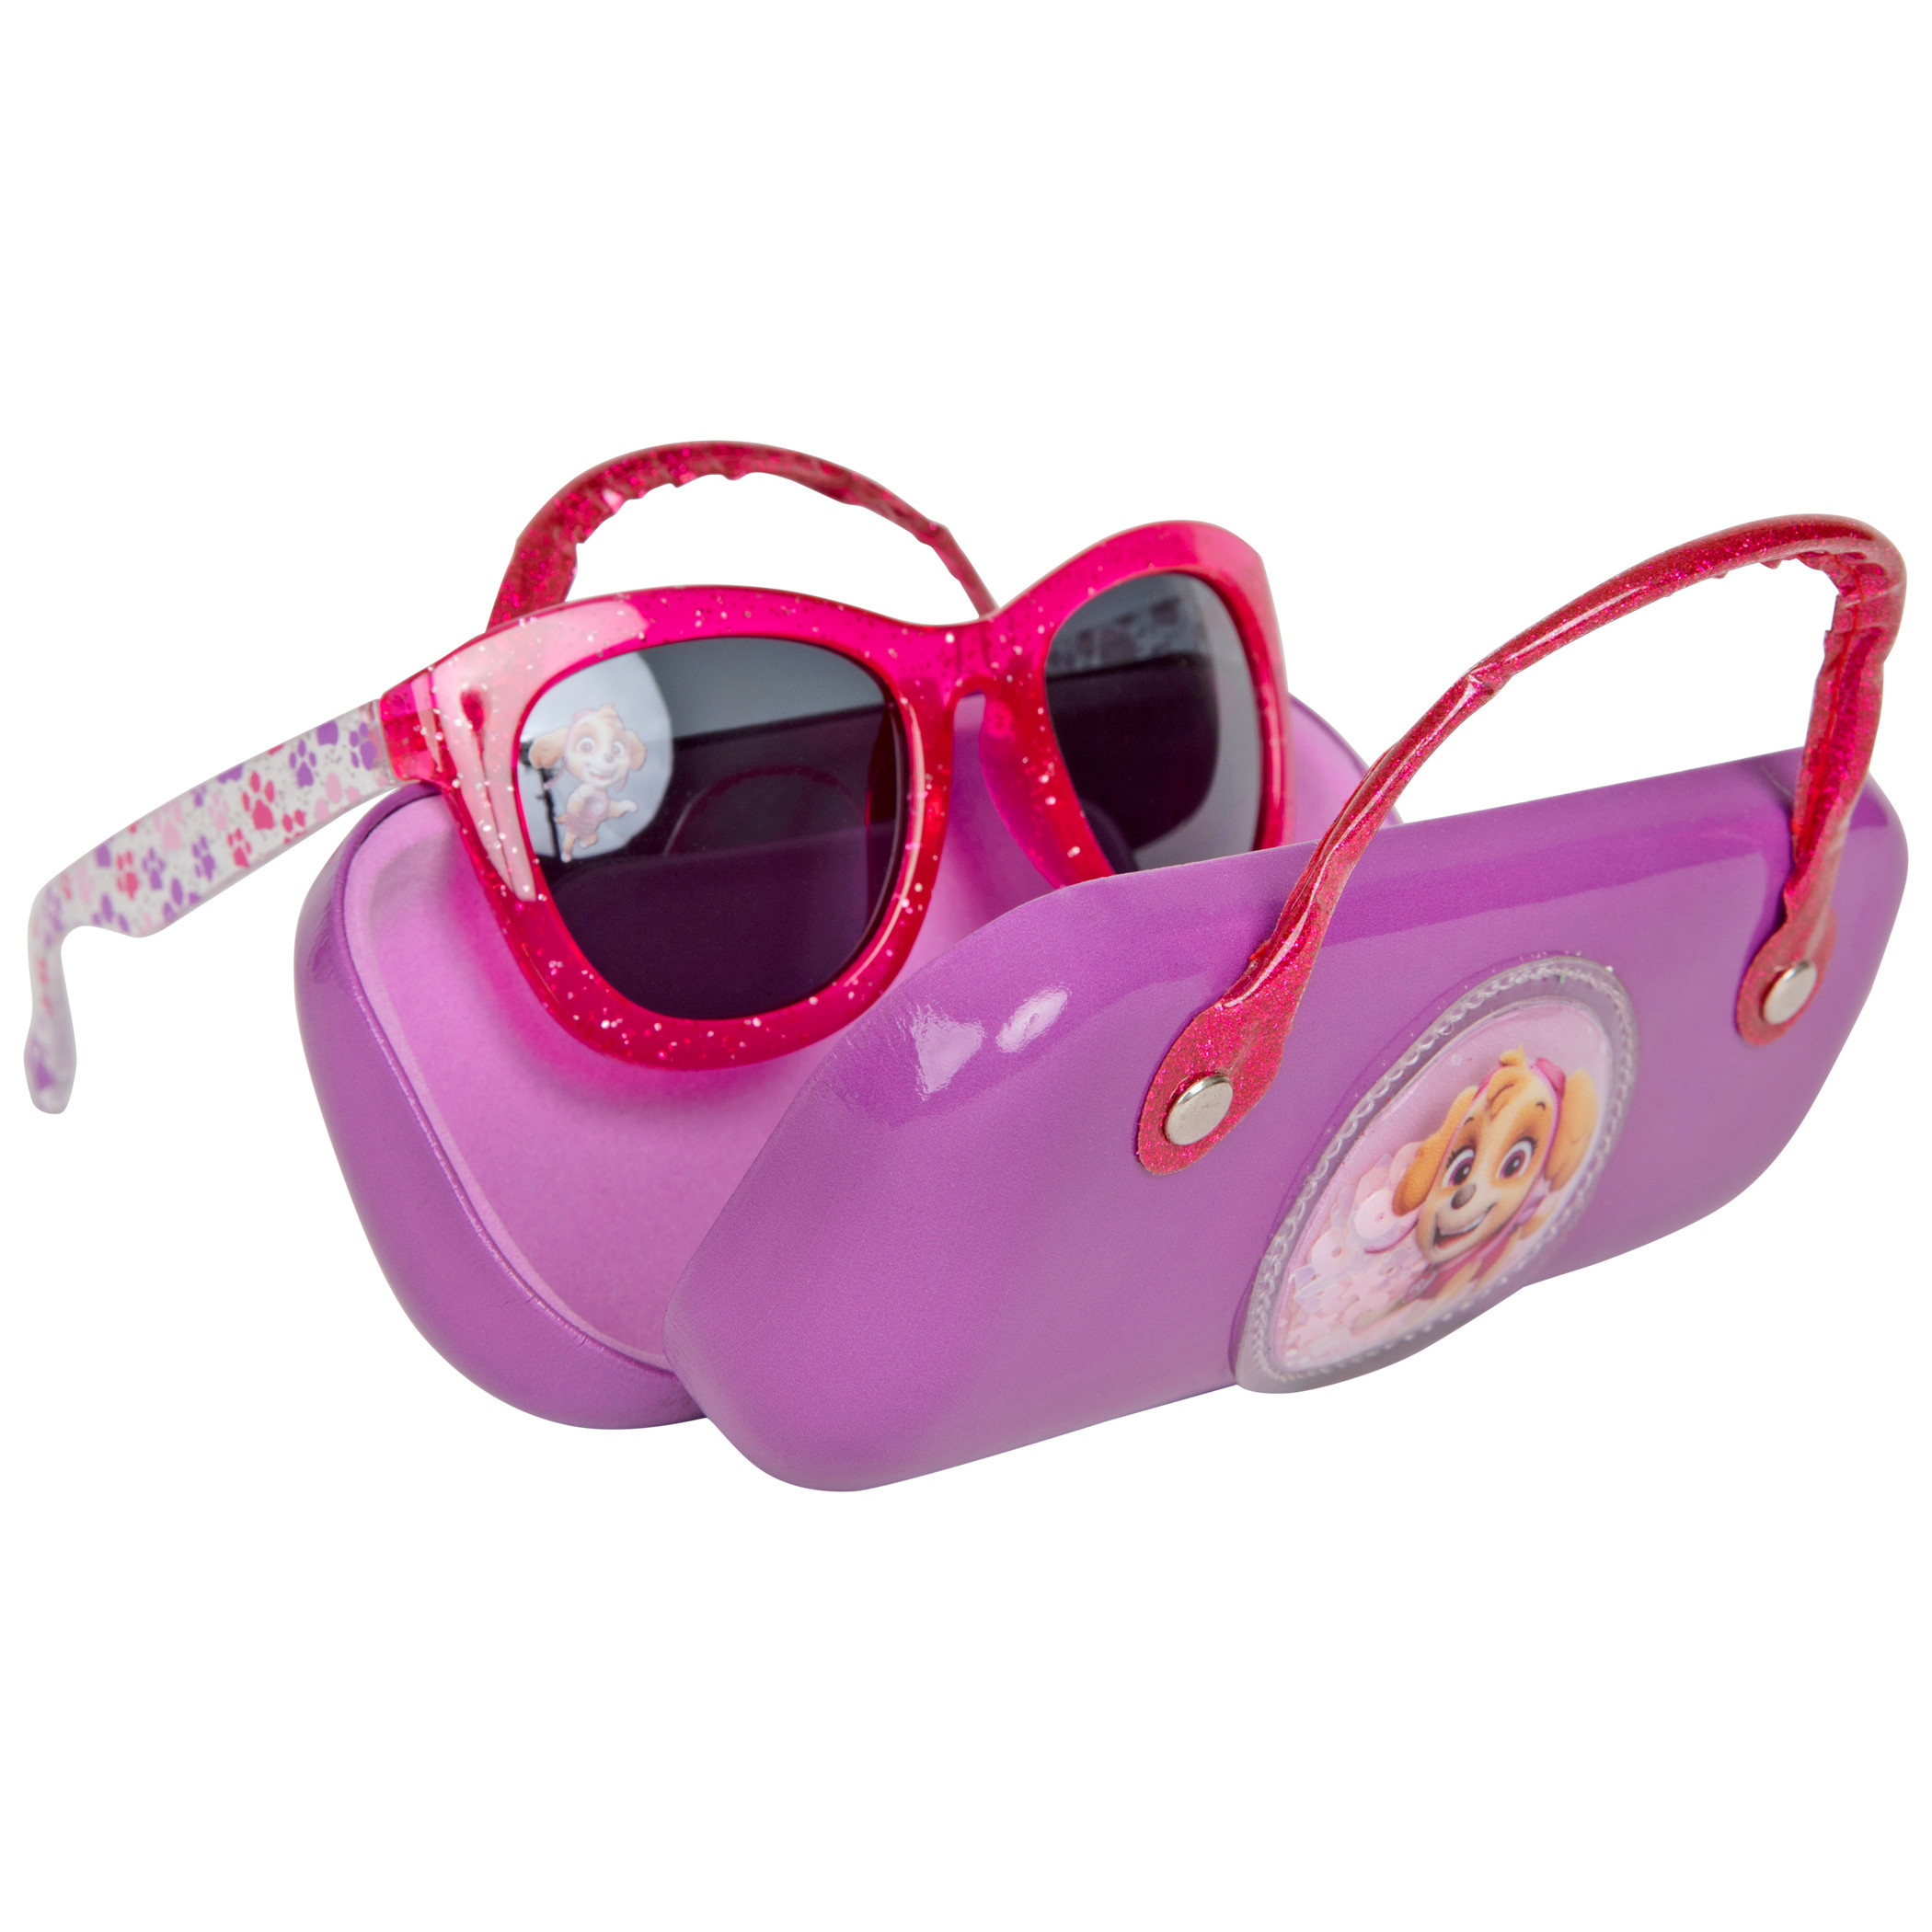 Nickelodeon Paw Patrol Girls Sunglasses w/ Handle Carrier Pouch